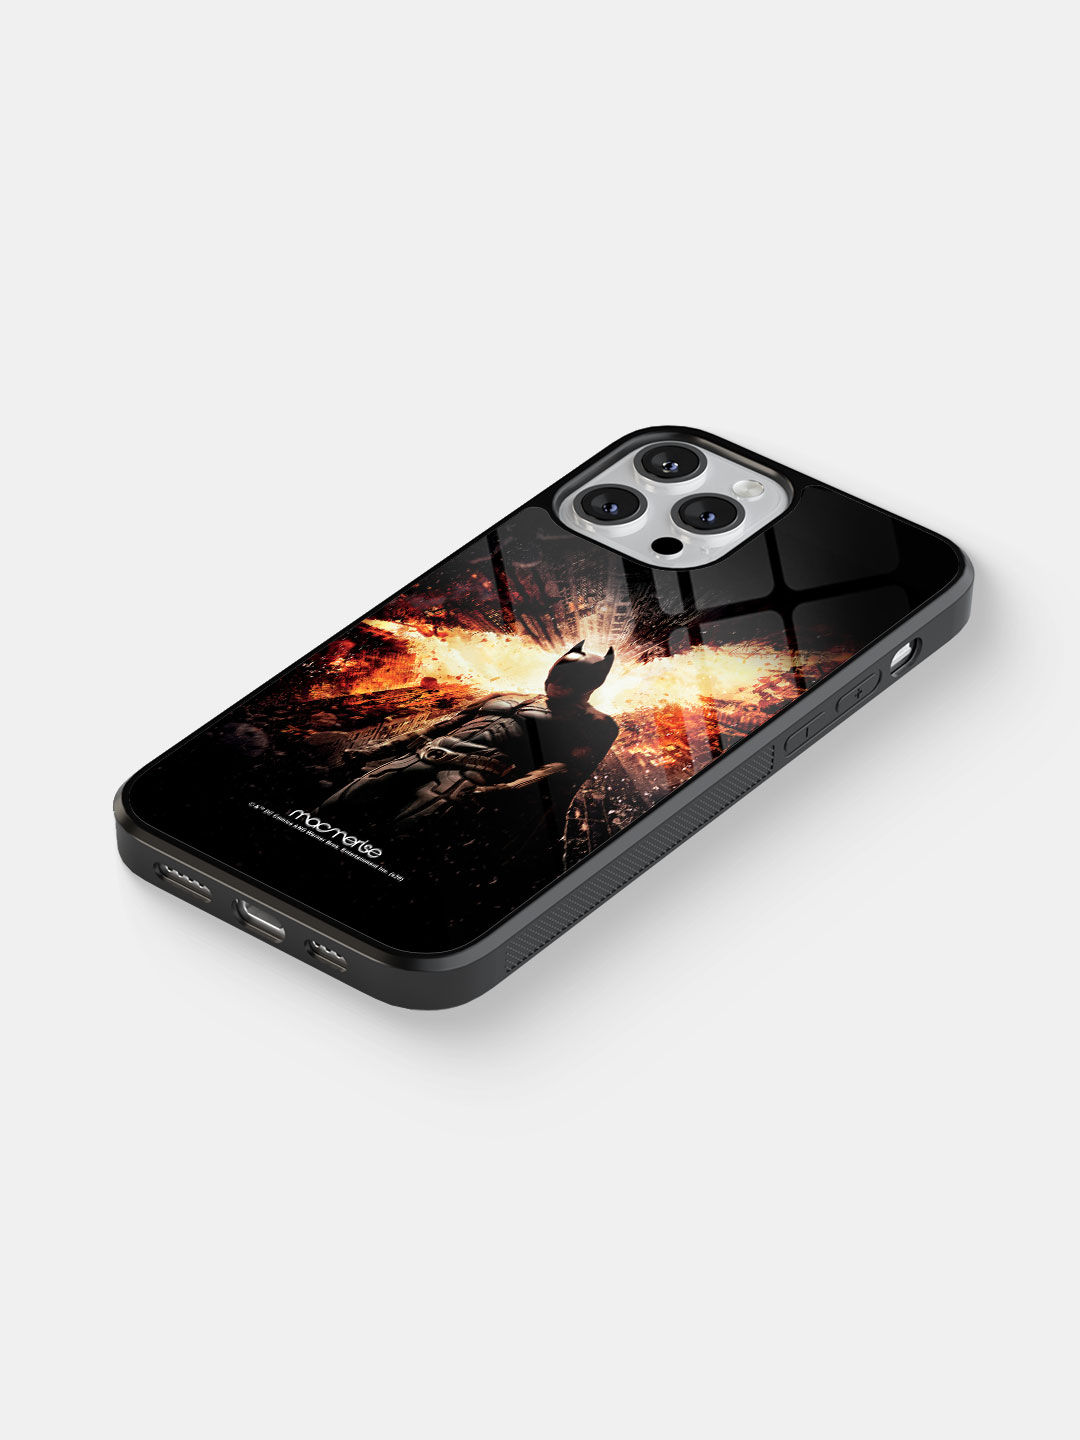 The Dark Knight Rises - Glass Case For iPhone 13 Pro Max